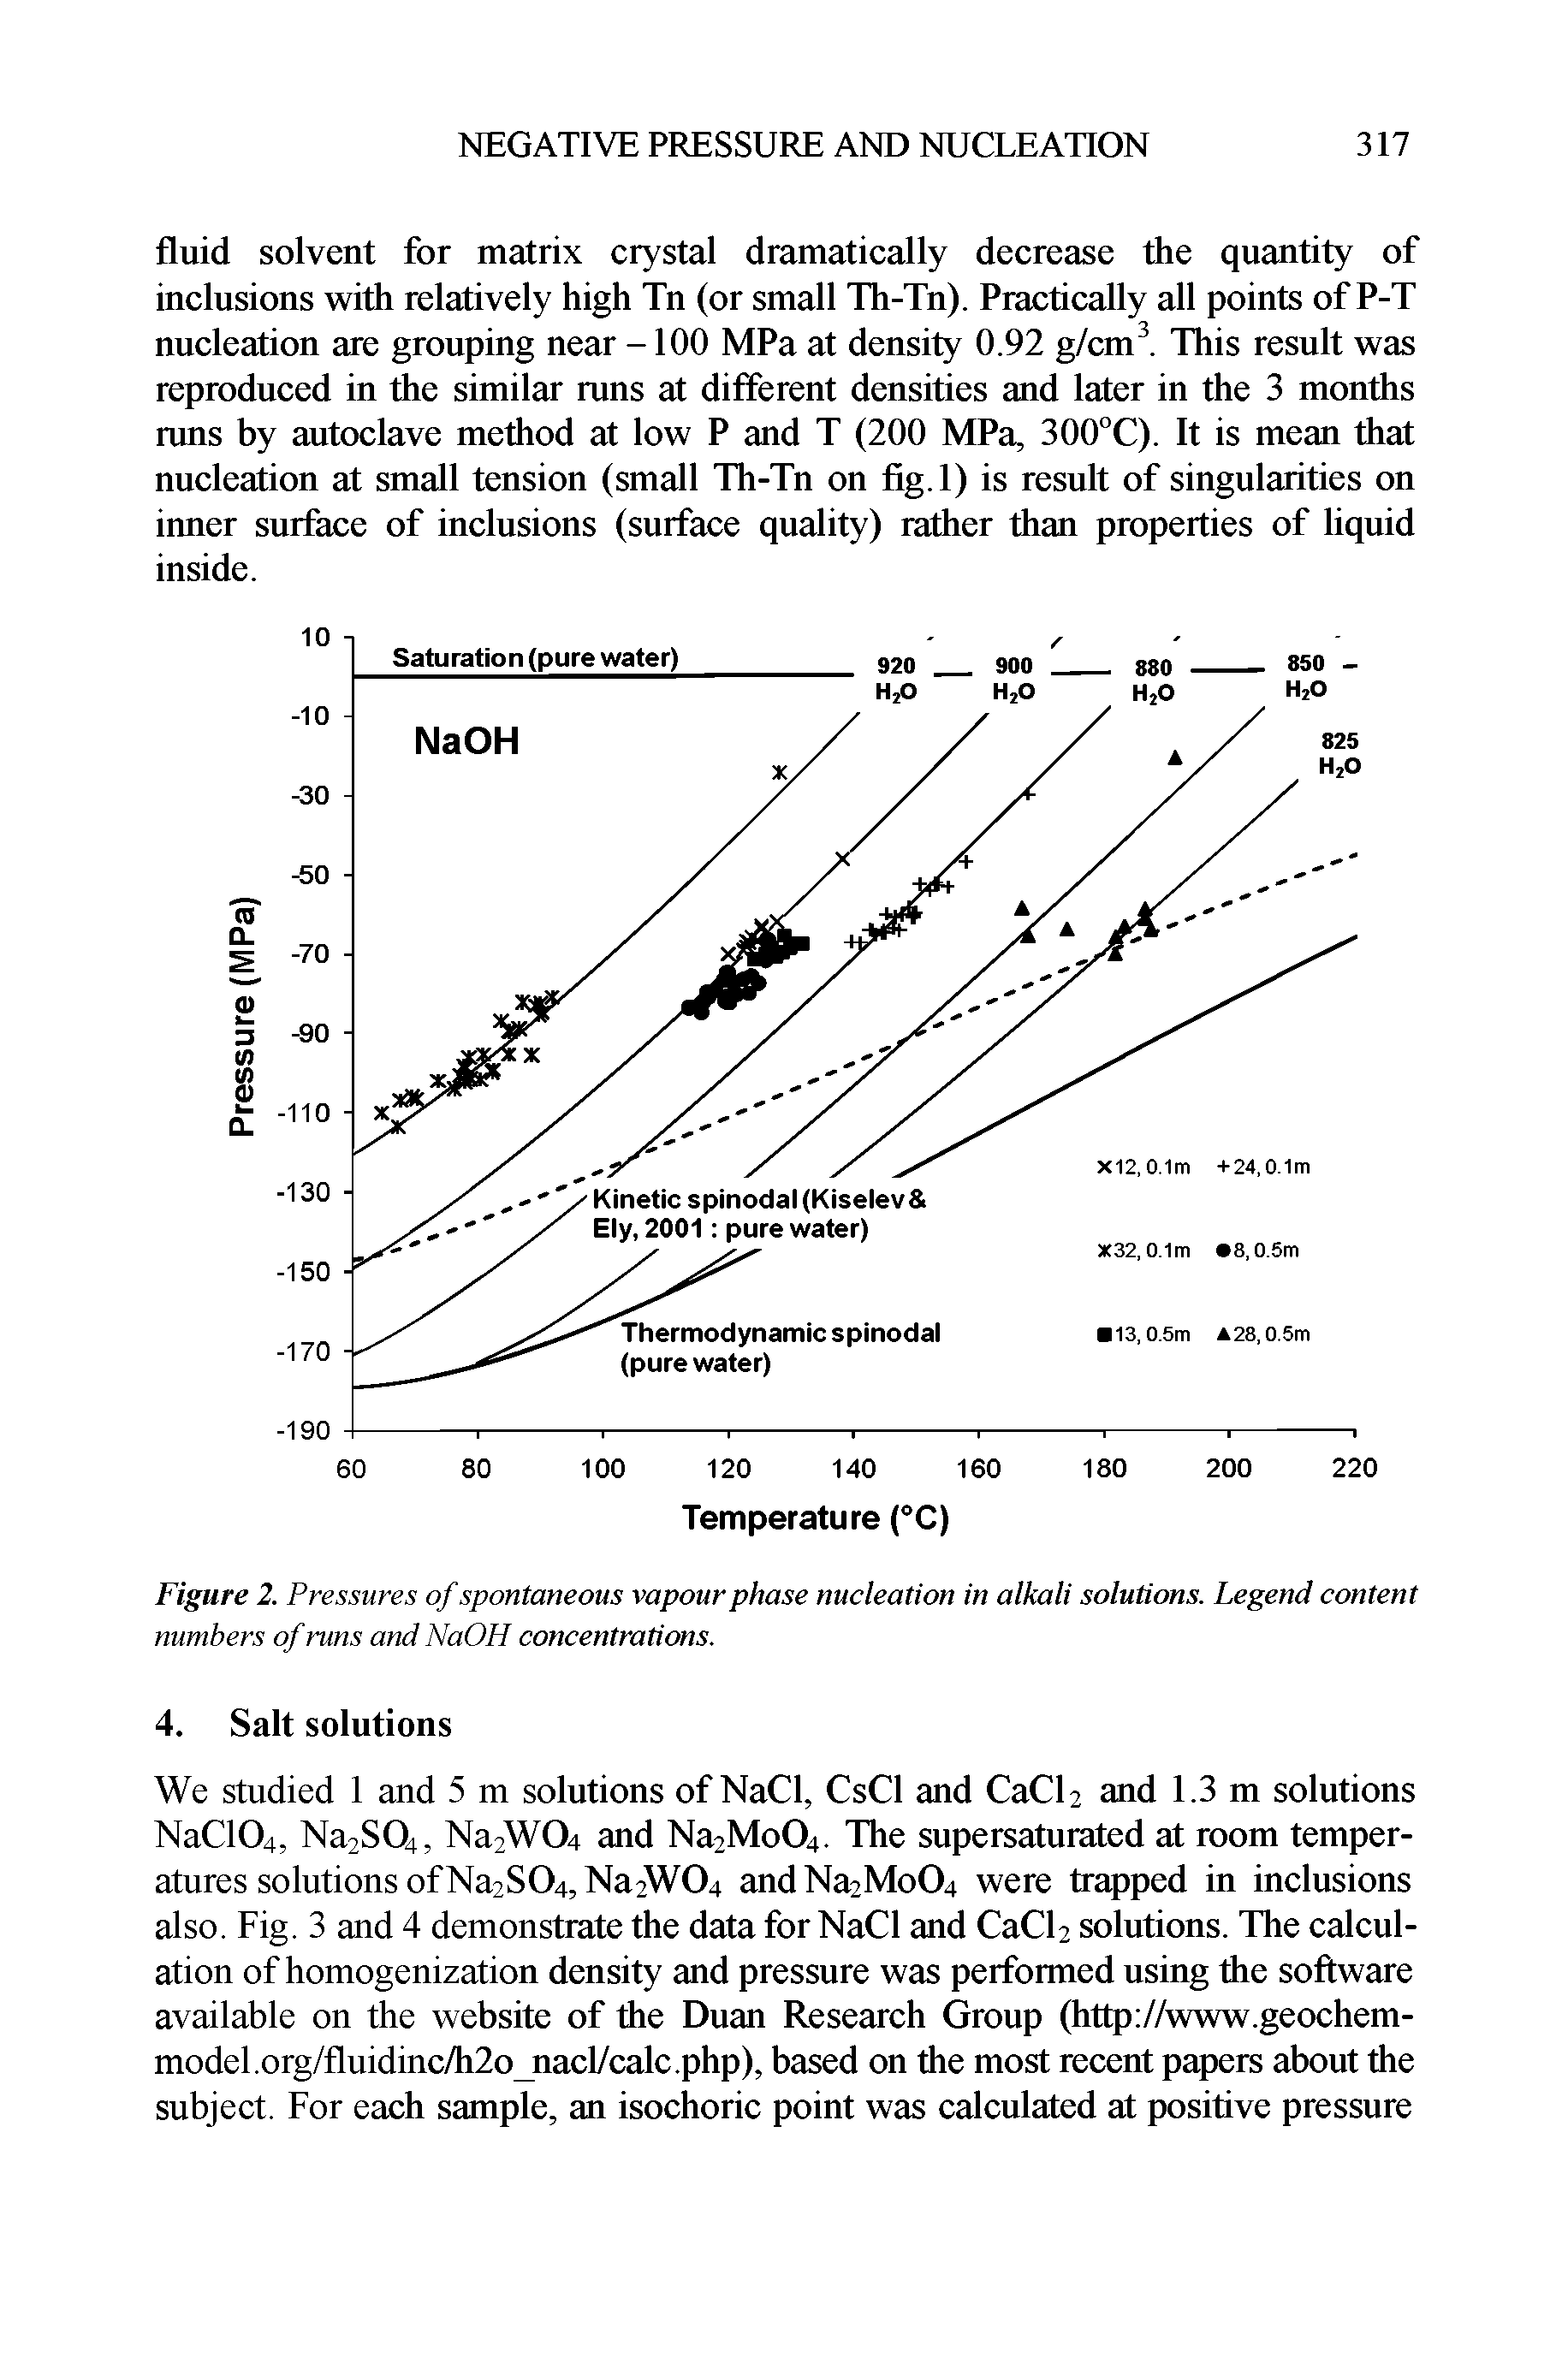 Figure 2. Pressures of spontaneous vapour phase nucleation in alkali solutions. Legend content numbers of runs and NaOH concentrations.